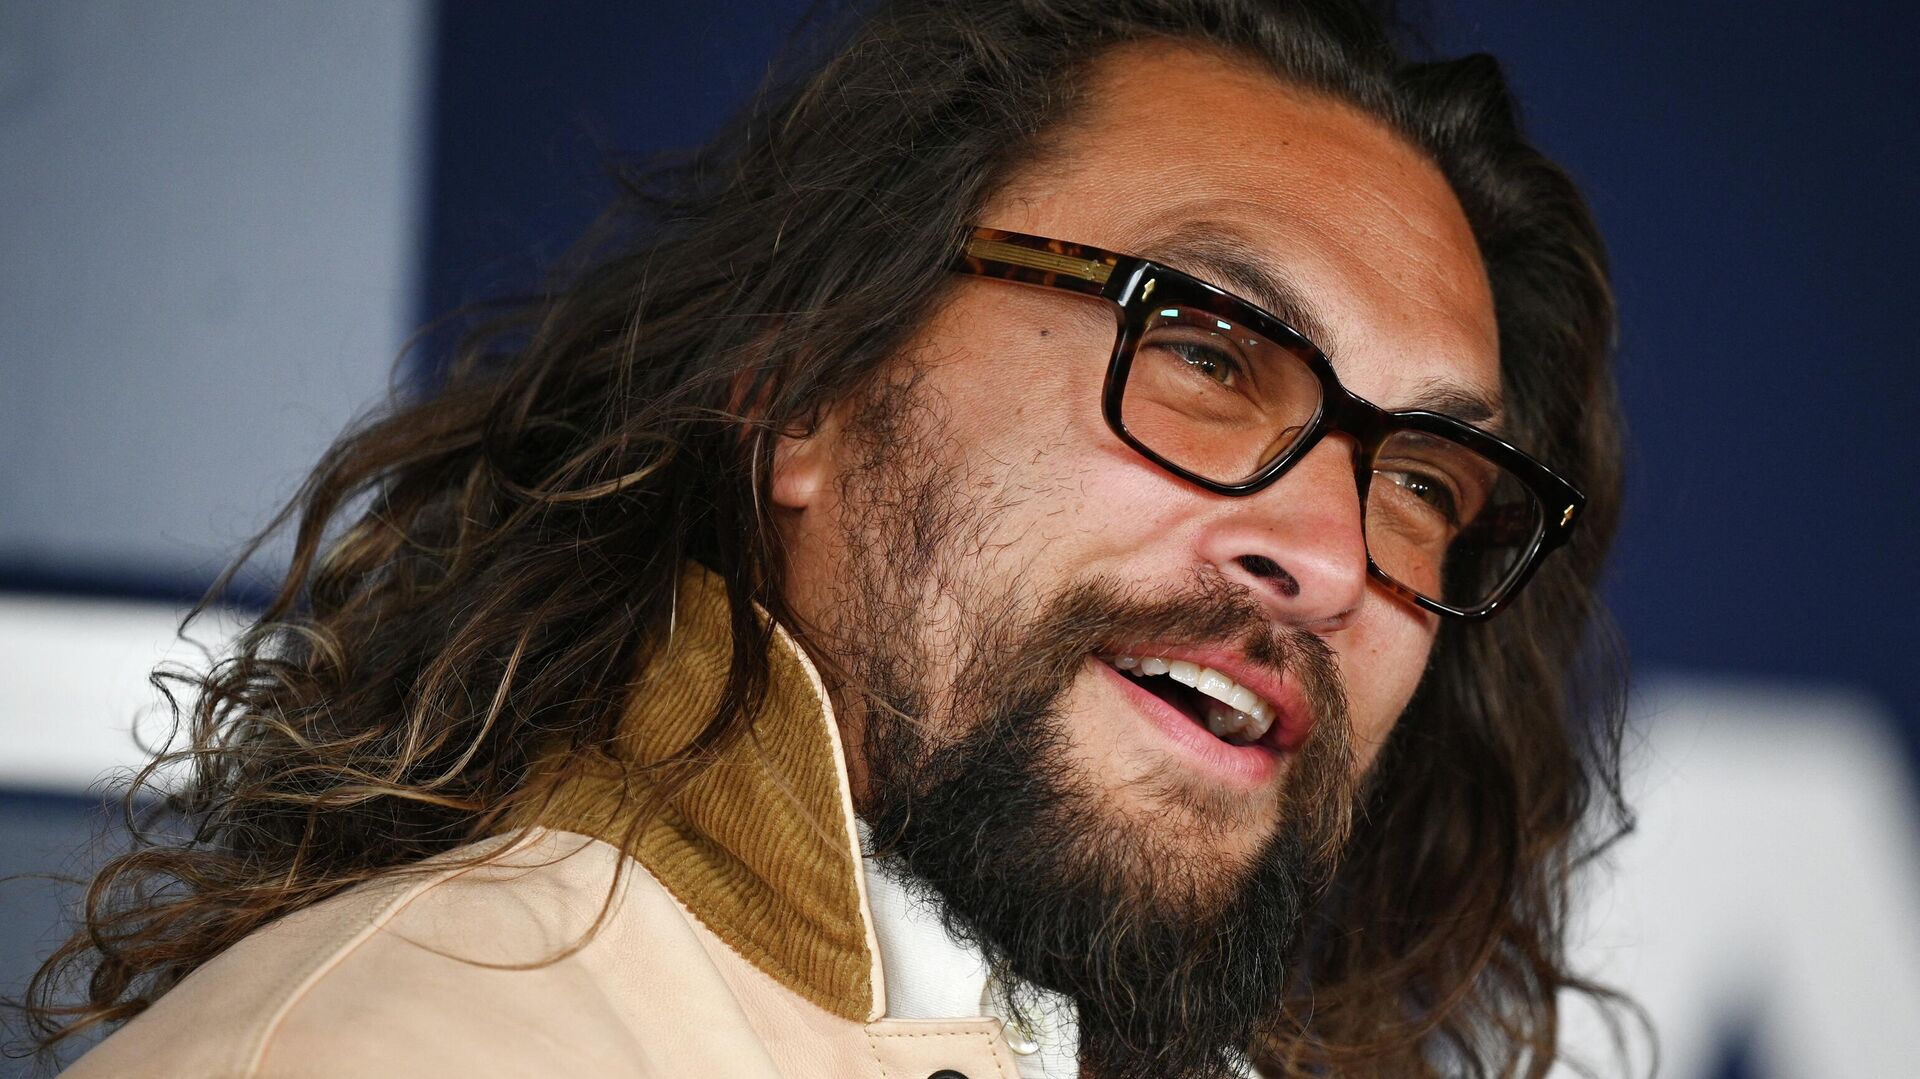 US actor Jason Momoa attends the premiere of Ambulance at the Academy Museum of Motion Pictures in Los Angeles, California, on April 4, 2022 - Sputnik International, 1920, 23.05.2022